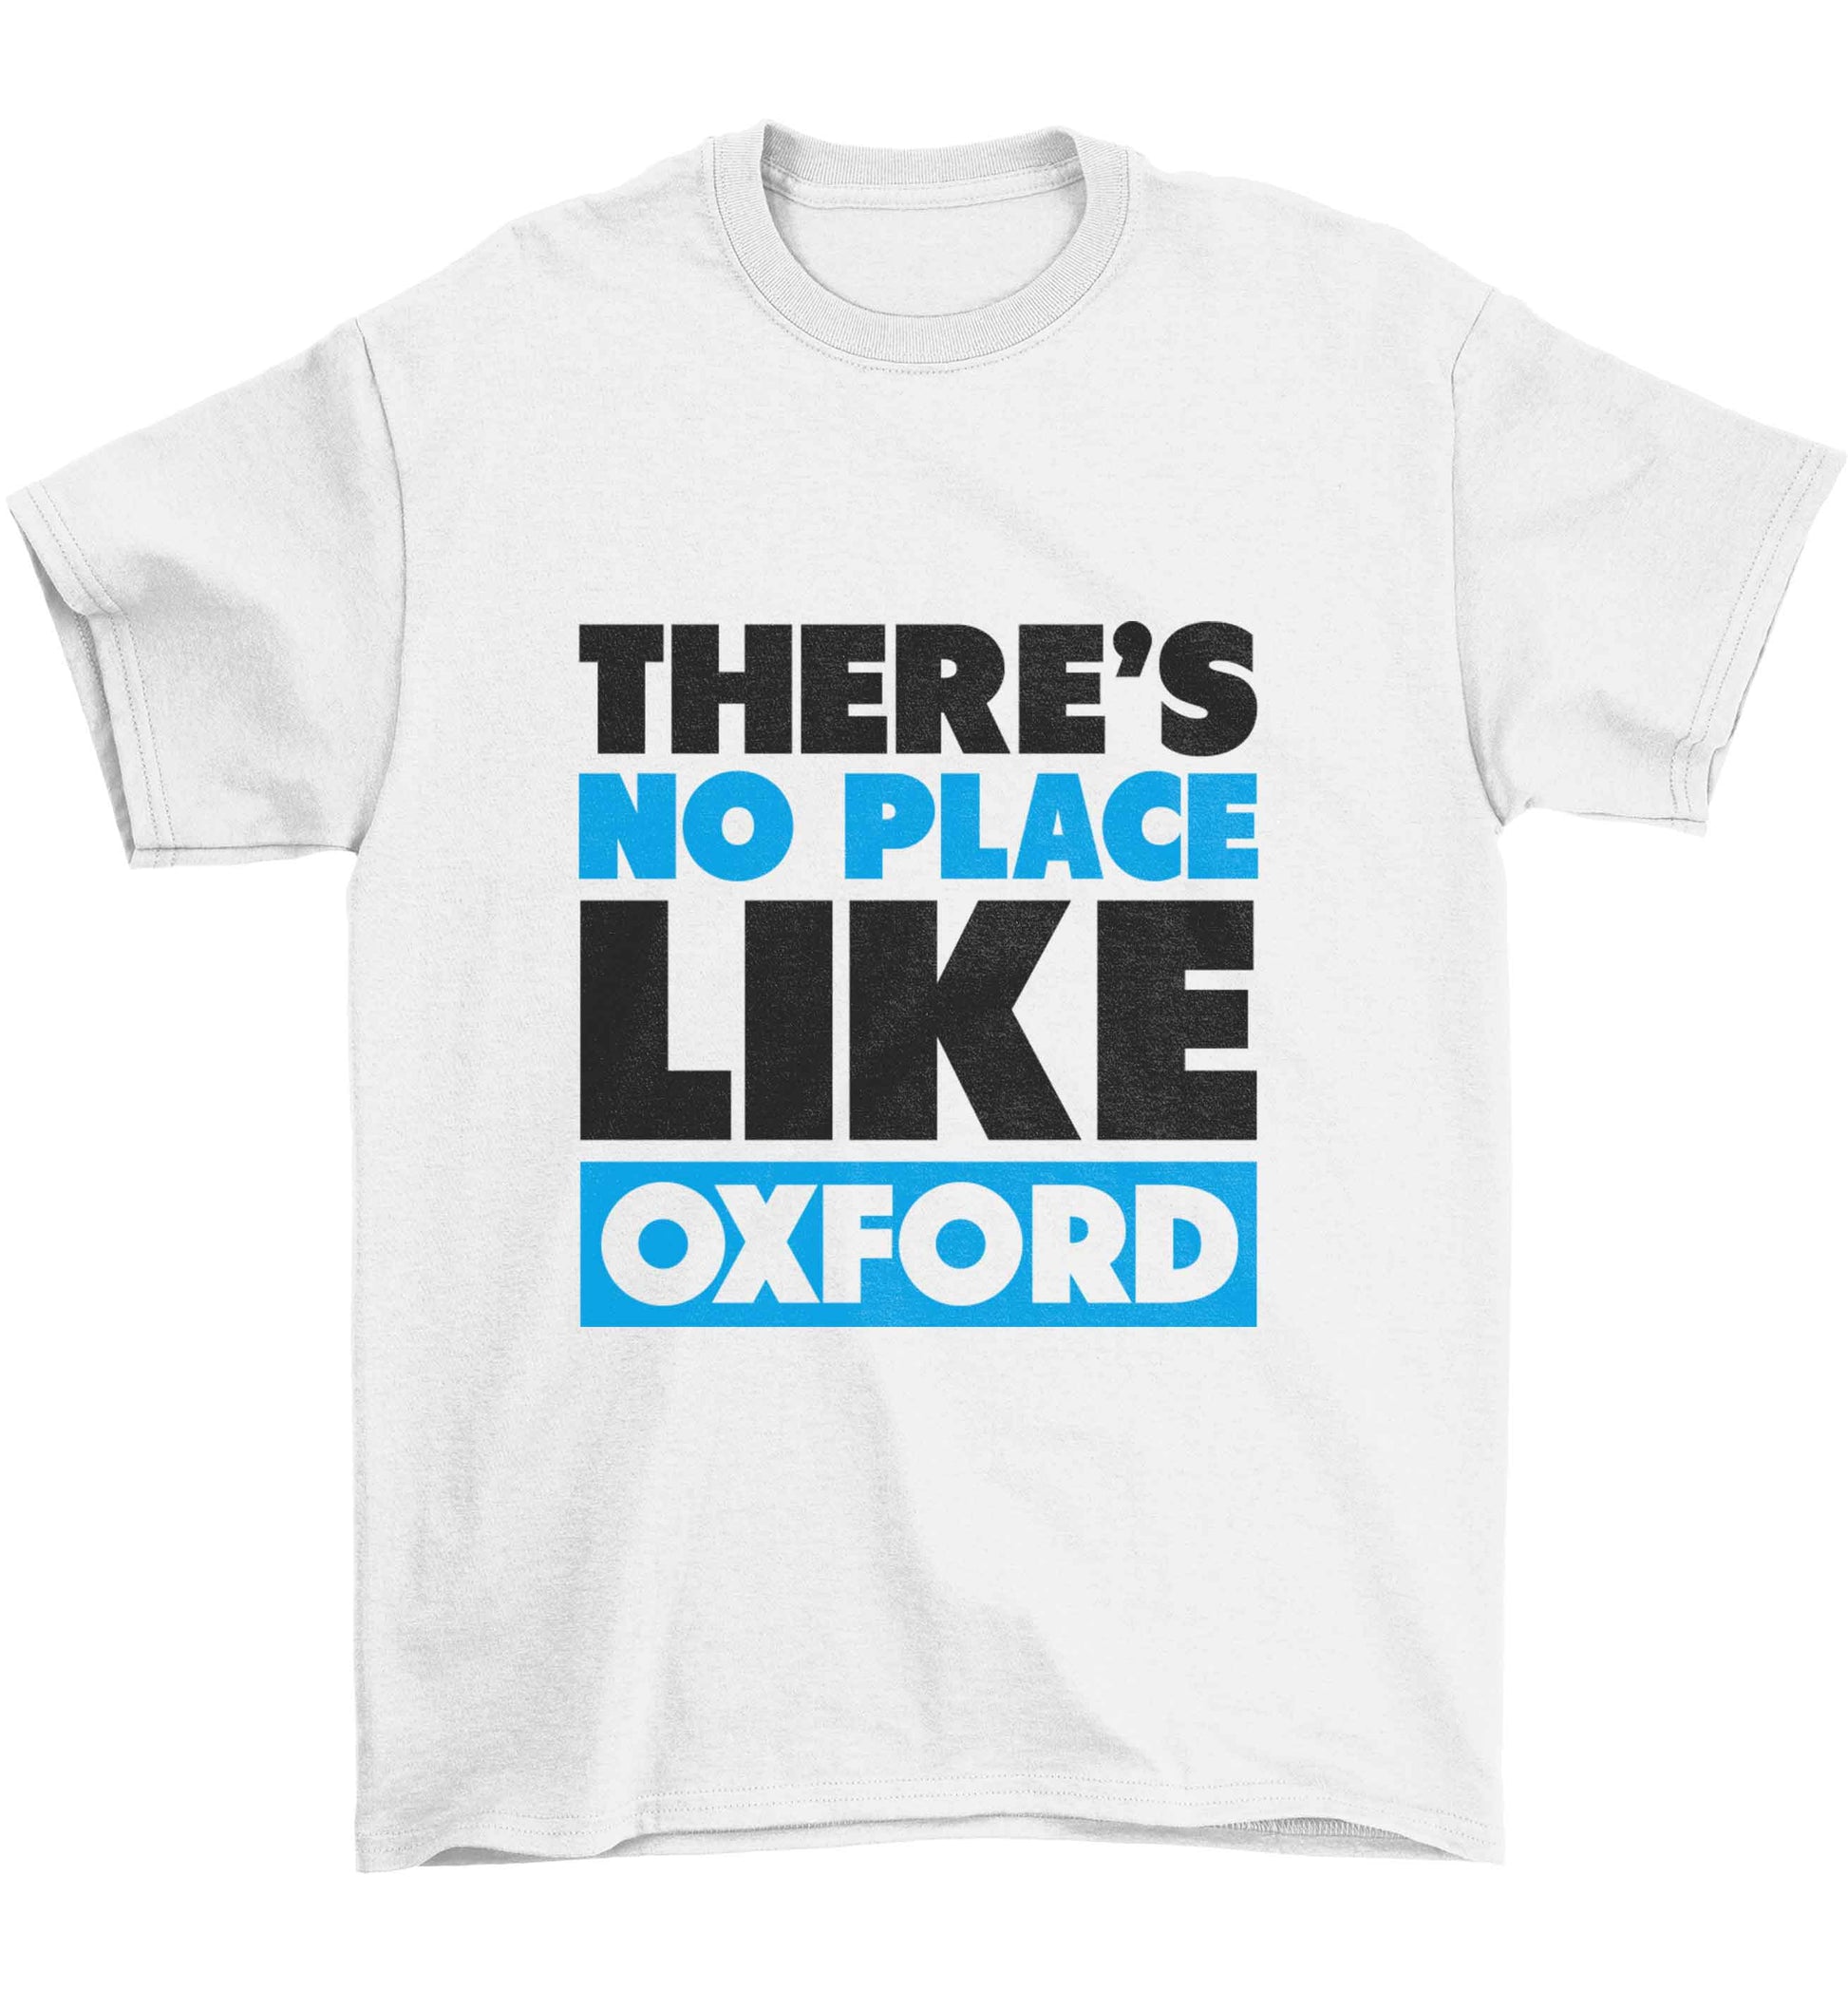 There's no place like Oxford Children's white Tshirt 12-13 Years